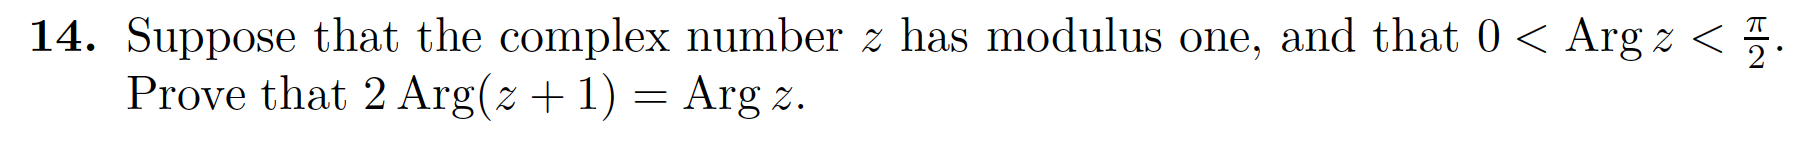 14. Suppose that the complex number z has modulus one, and that 0 < Arg z <
2
TT
Prove that 2 Arg(z 1)
Arg z
